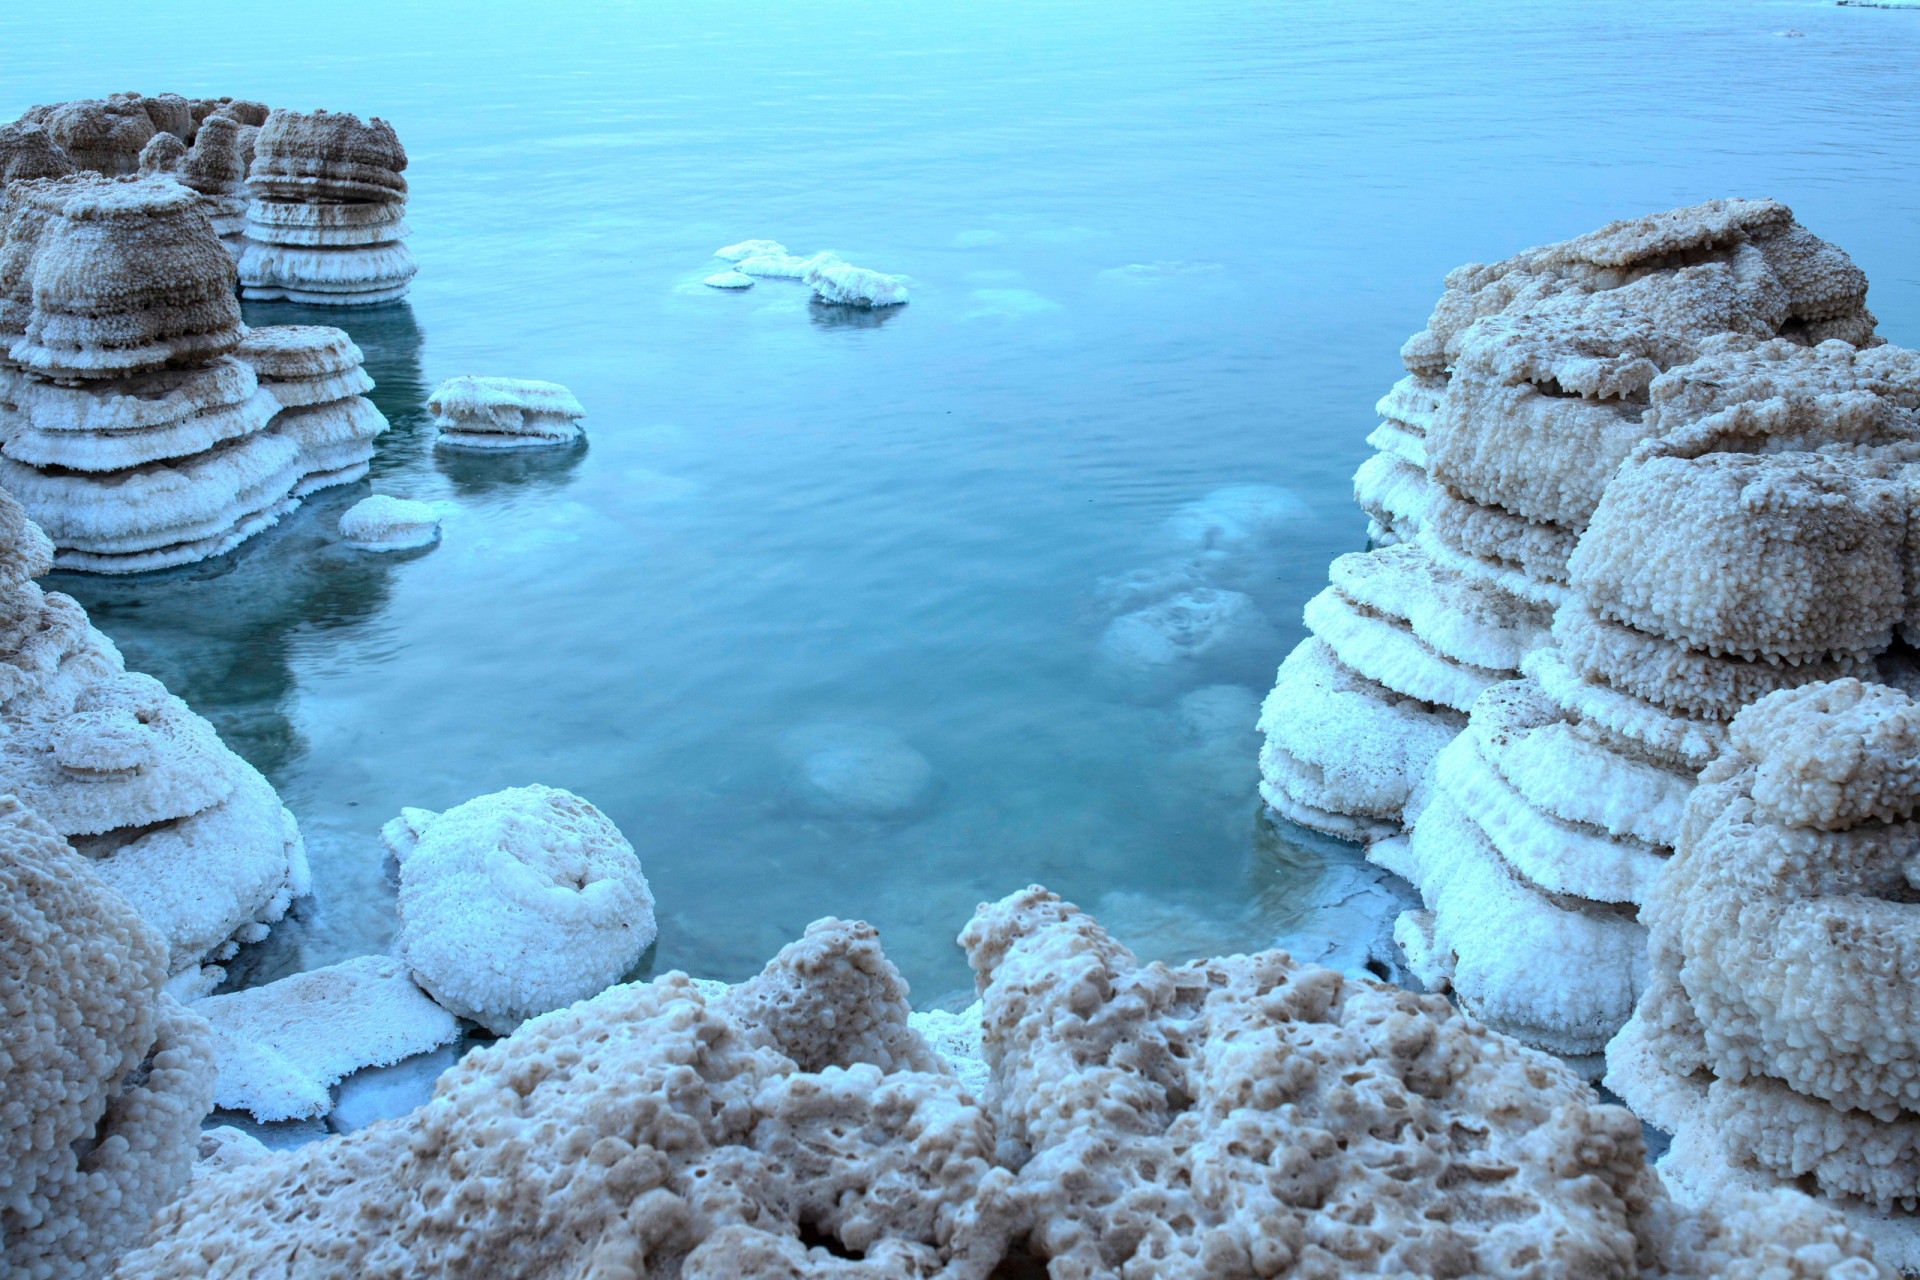 <p>But it's those sediment microorganisms never before found in the Dead Sea that have marine biologists scratching their heads in delighted bewilderment.</p><p><a href="https://www.msn.com/en-us/community/channel/vid-7xx8mnucu55yw63we9va2gwr7uihbxwc68fxqp25x6tg4ftibpra?cvid=94631541bc0f4f89bfd59158d696ad7e">Follow us and access great exclusive content every day</a></p>